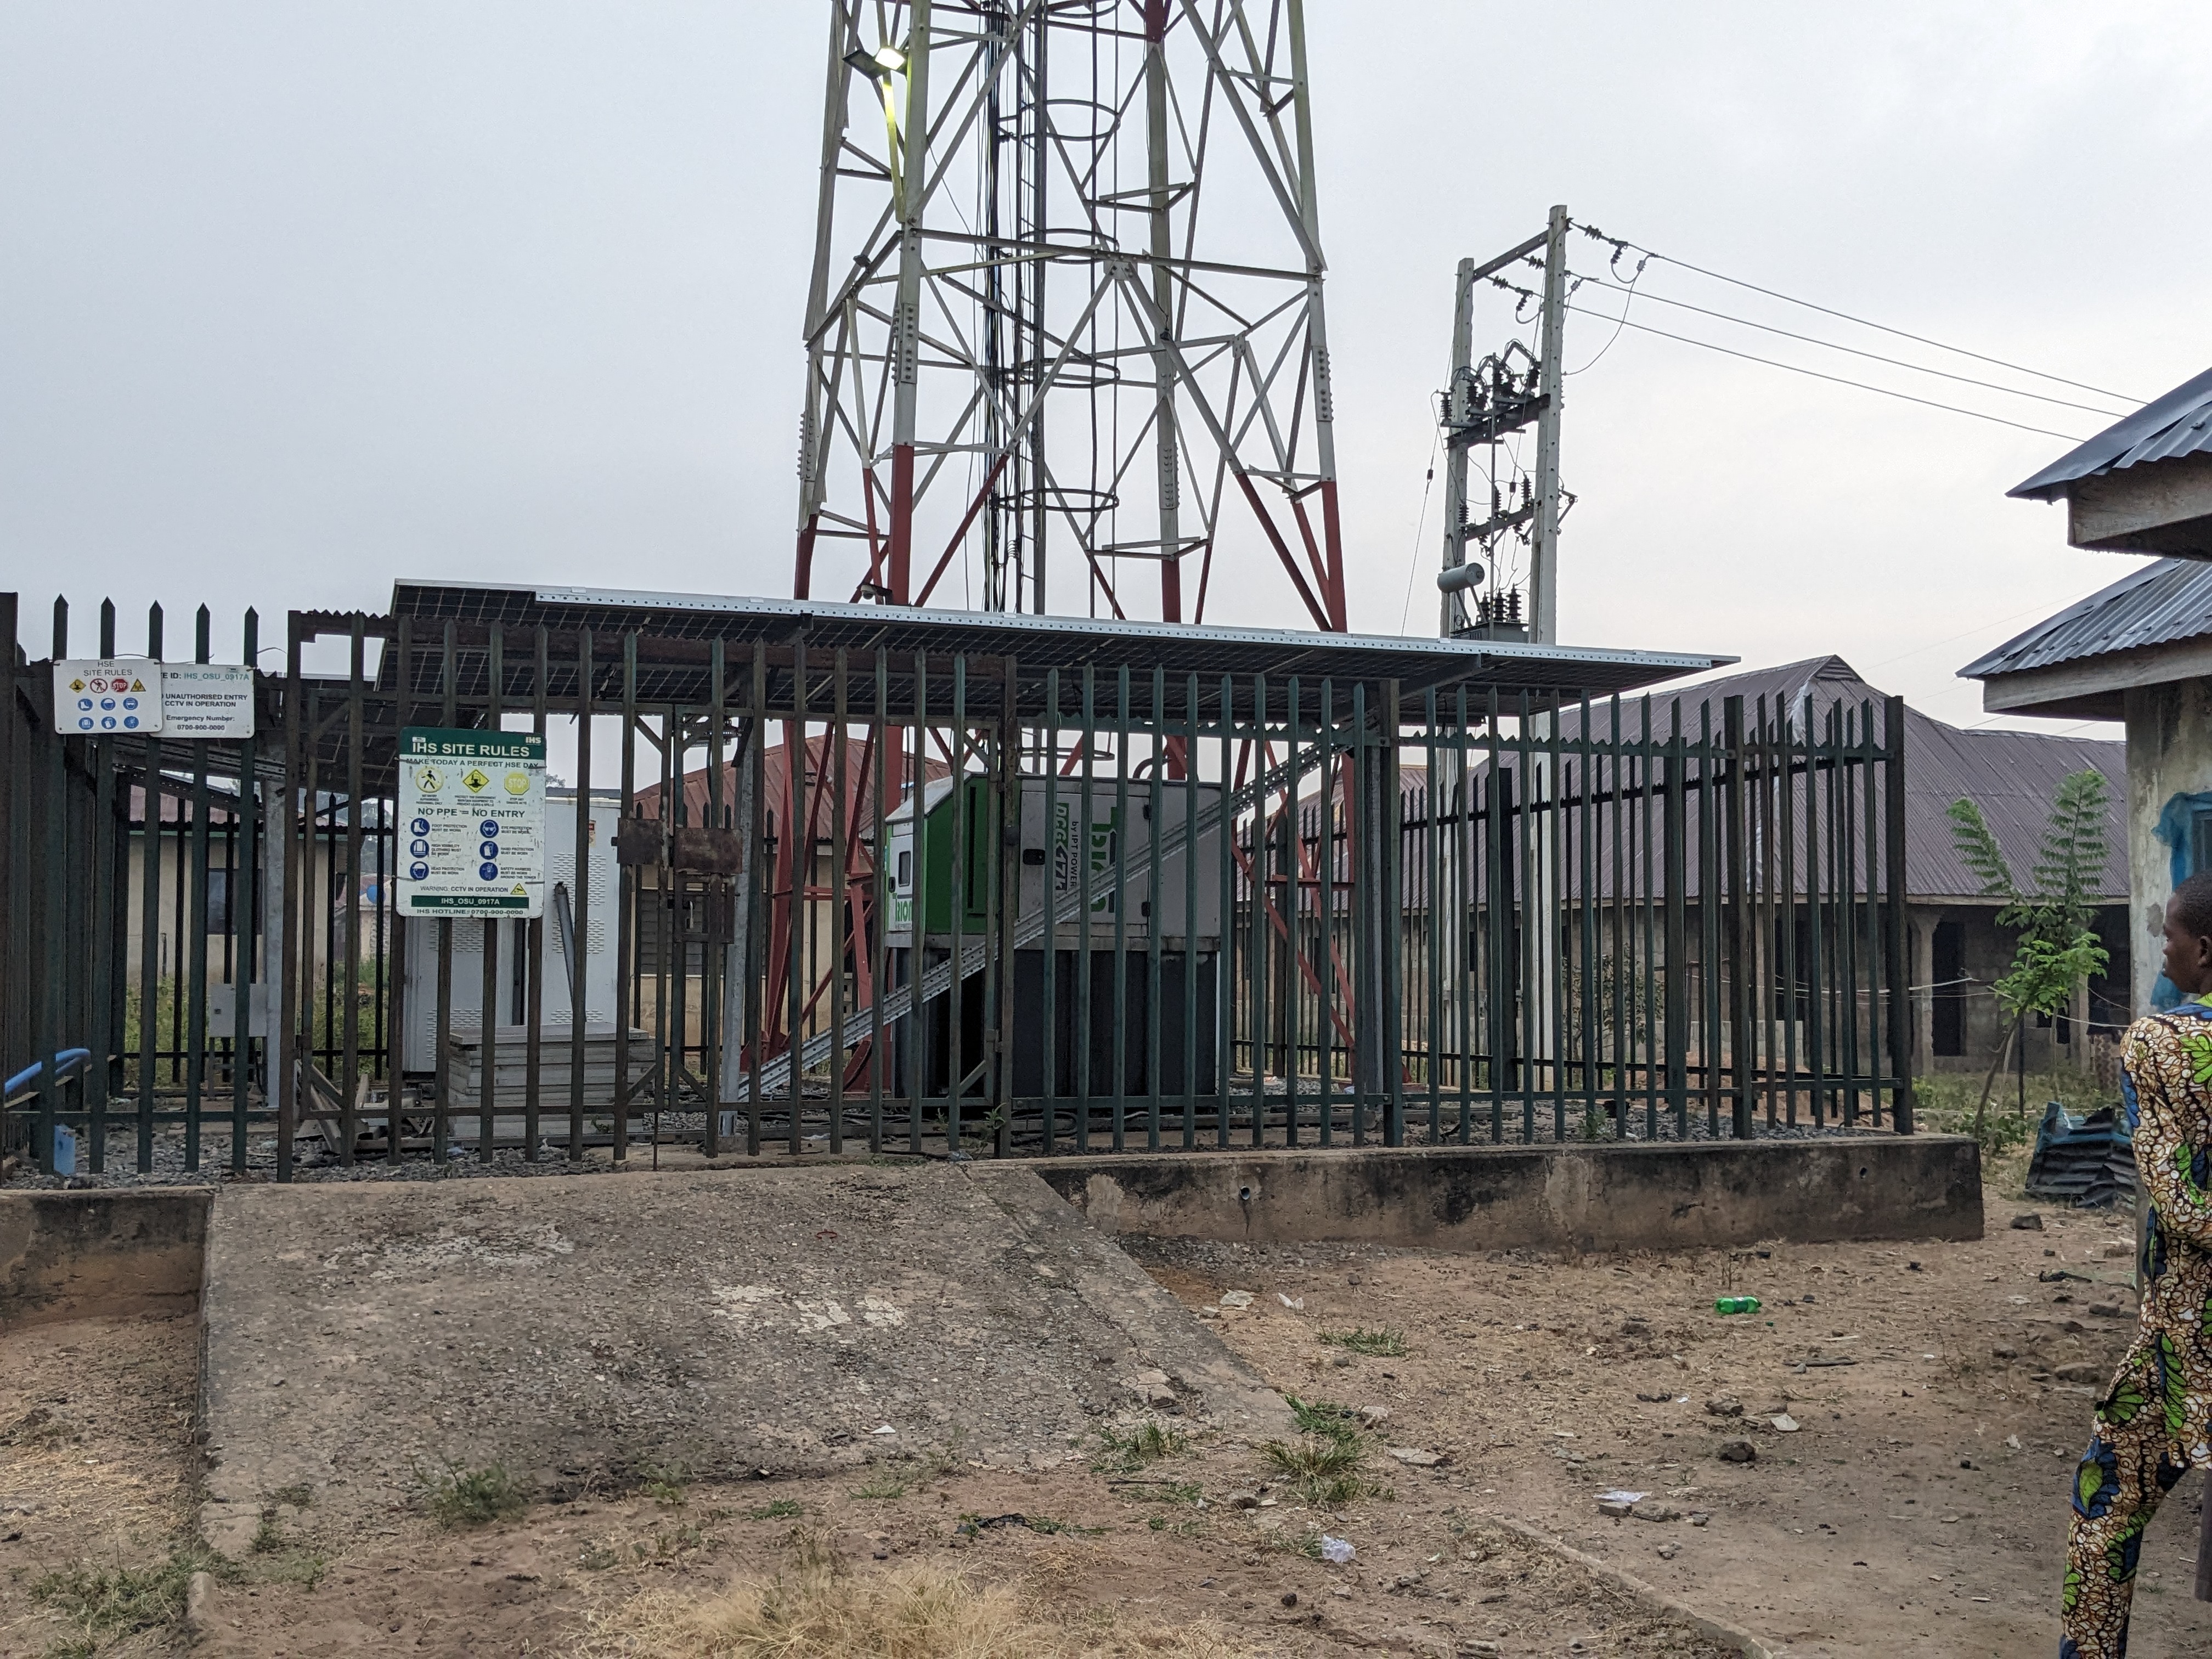 Some Osun Residents Cannot Sleep at Night Due to Noise From an IHS Towers Mast